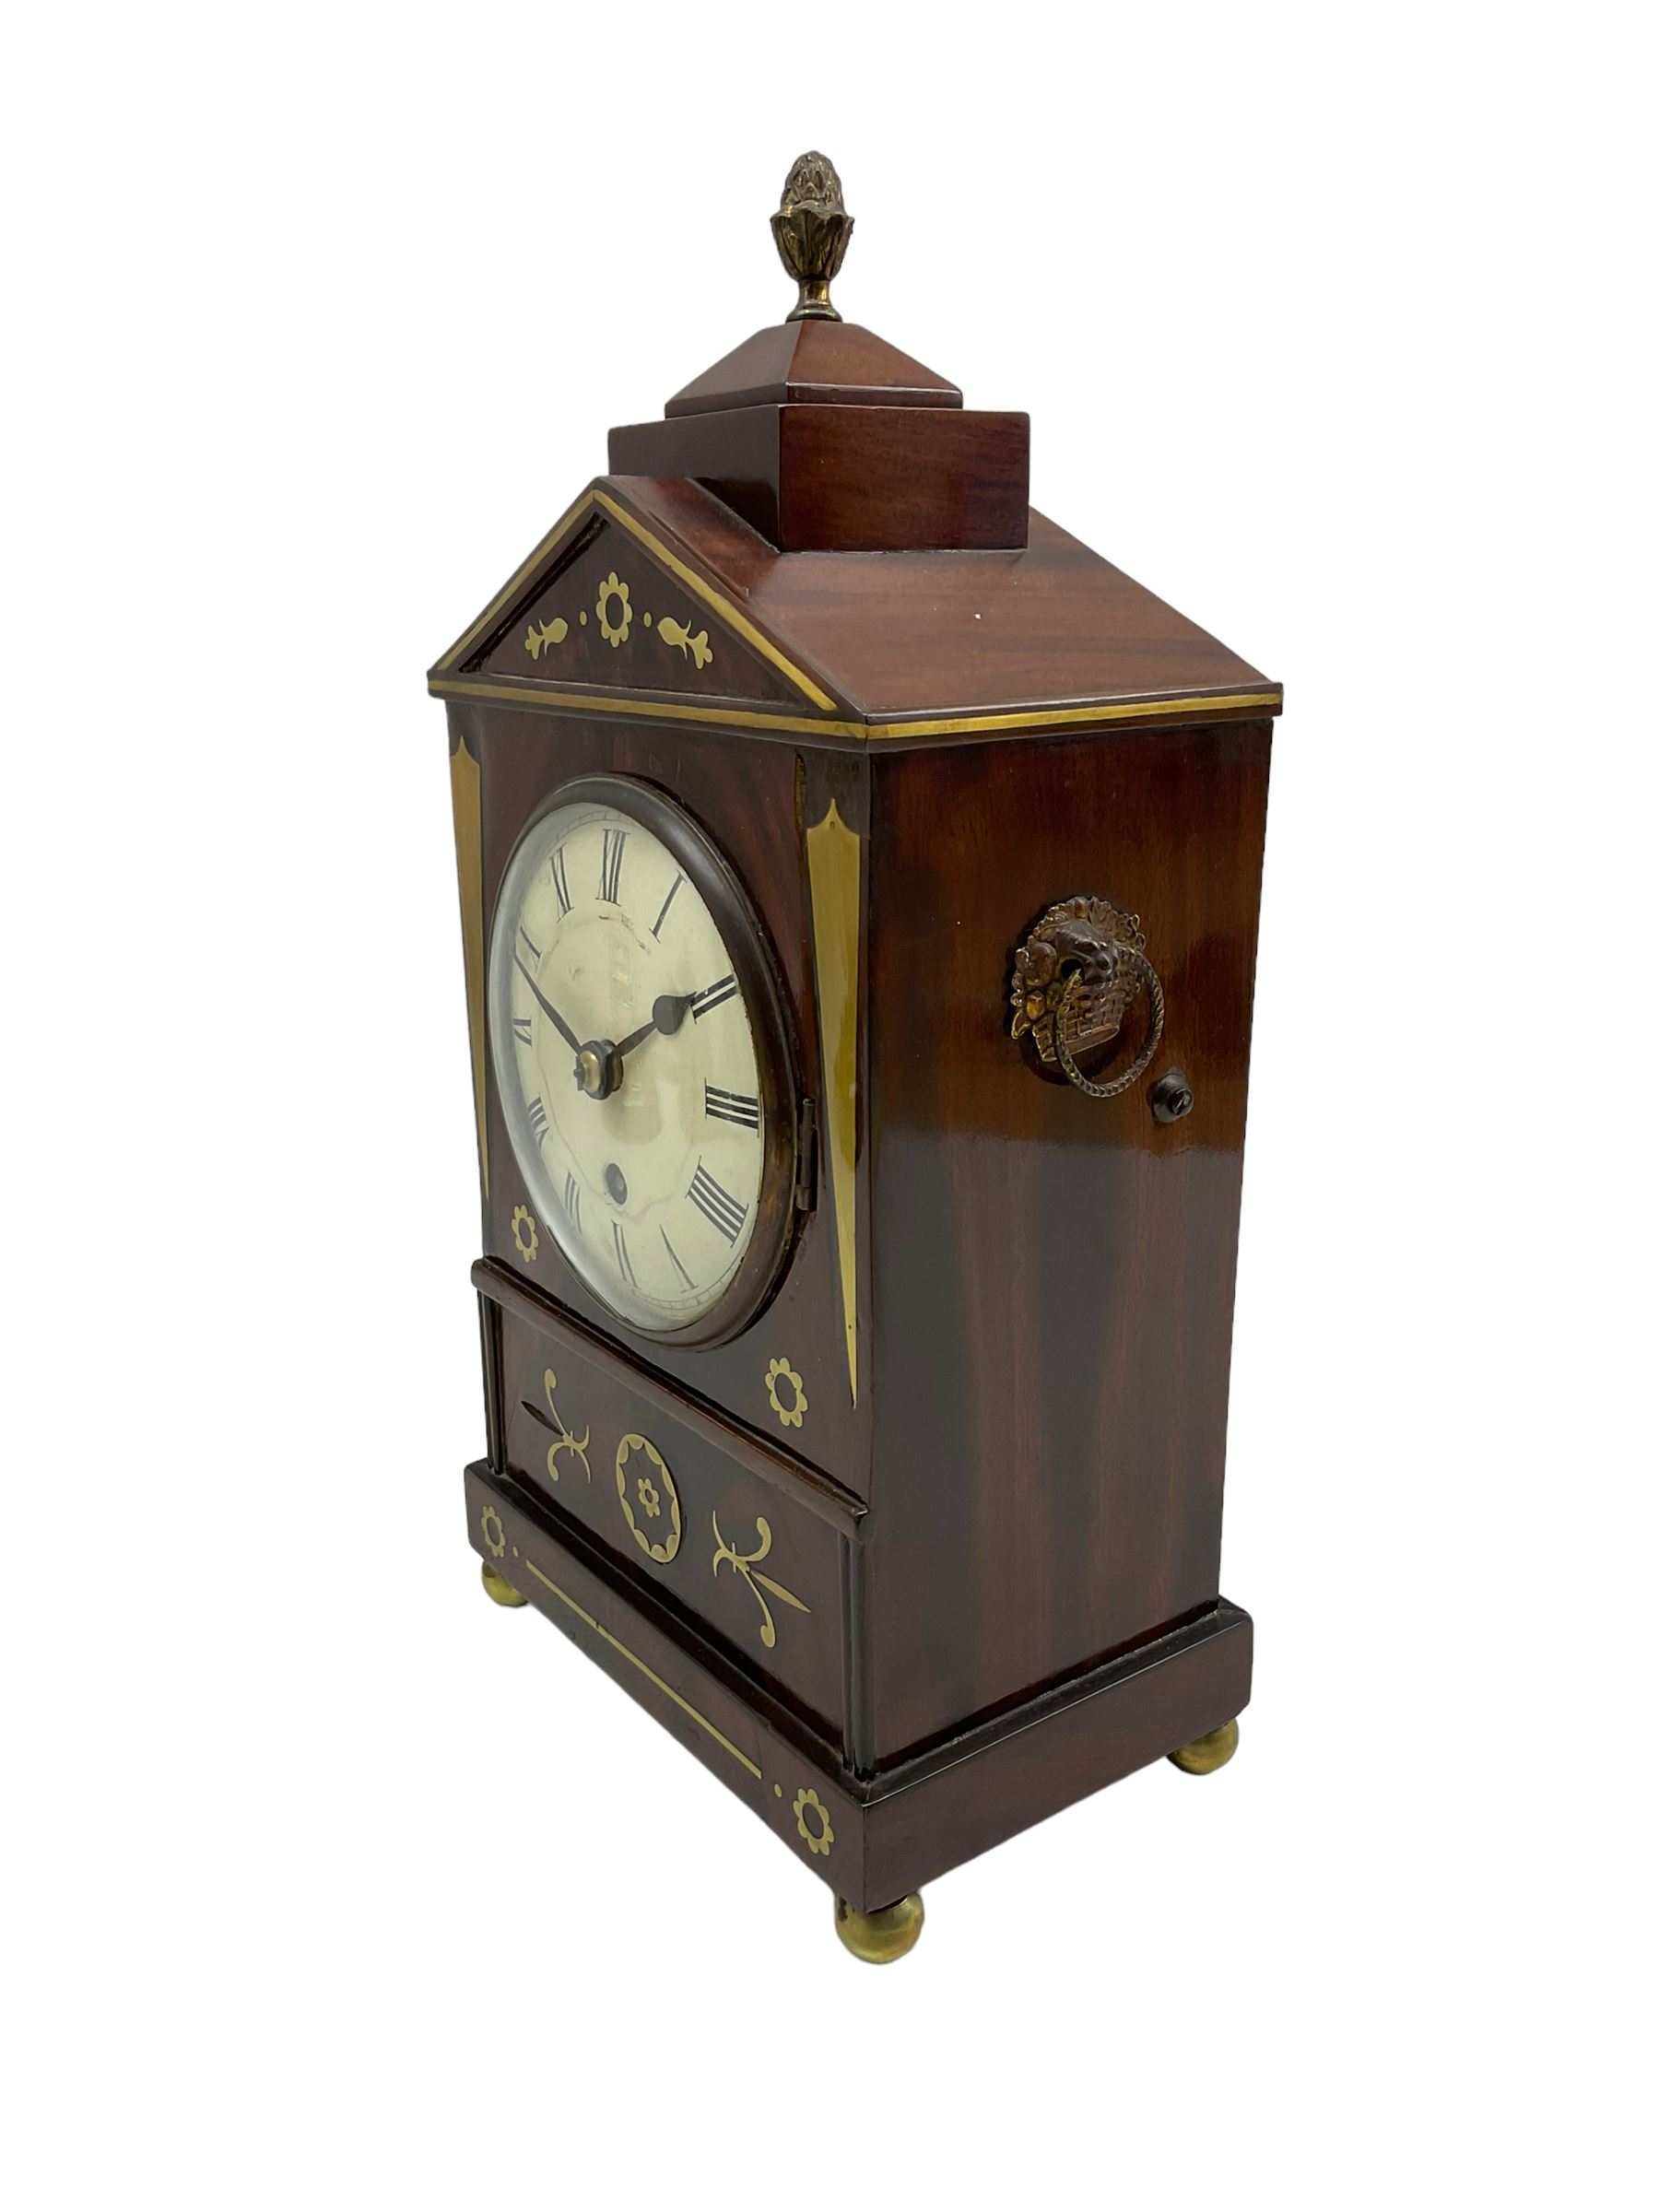 A small William IV brass inlaid mahogany bracket clock with an eight-day timepiece movement - Image 5 of 7